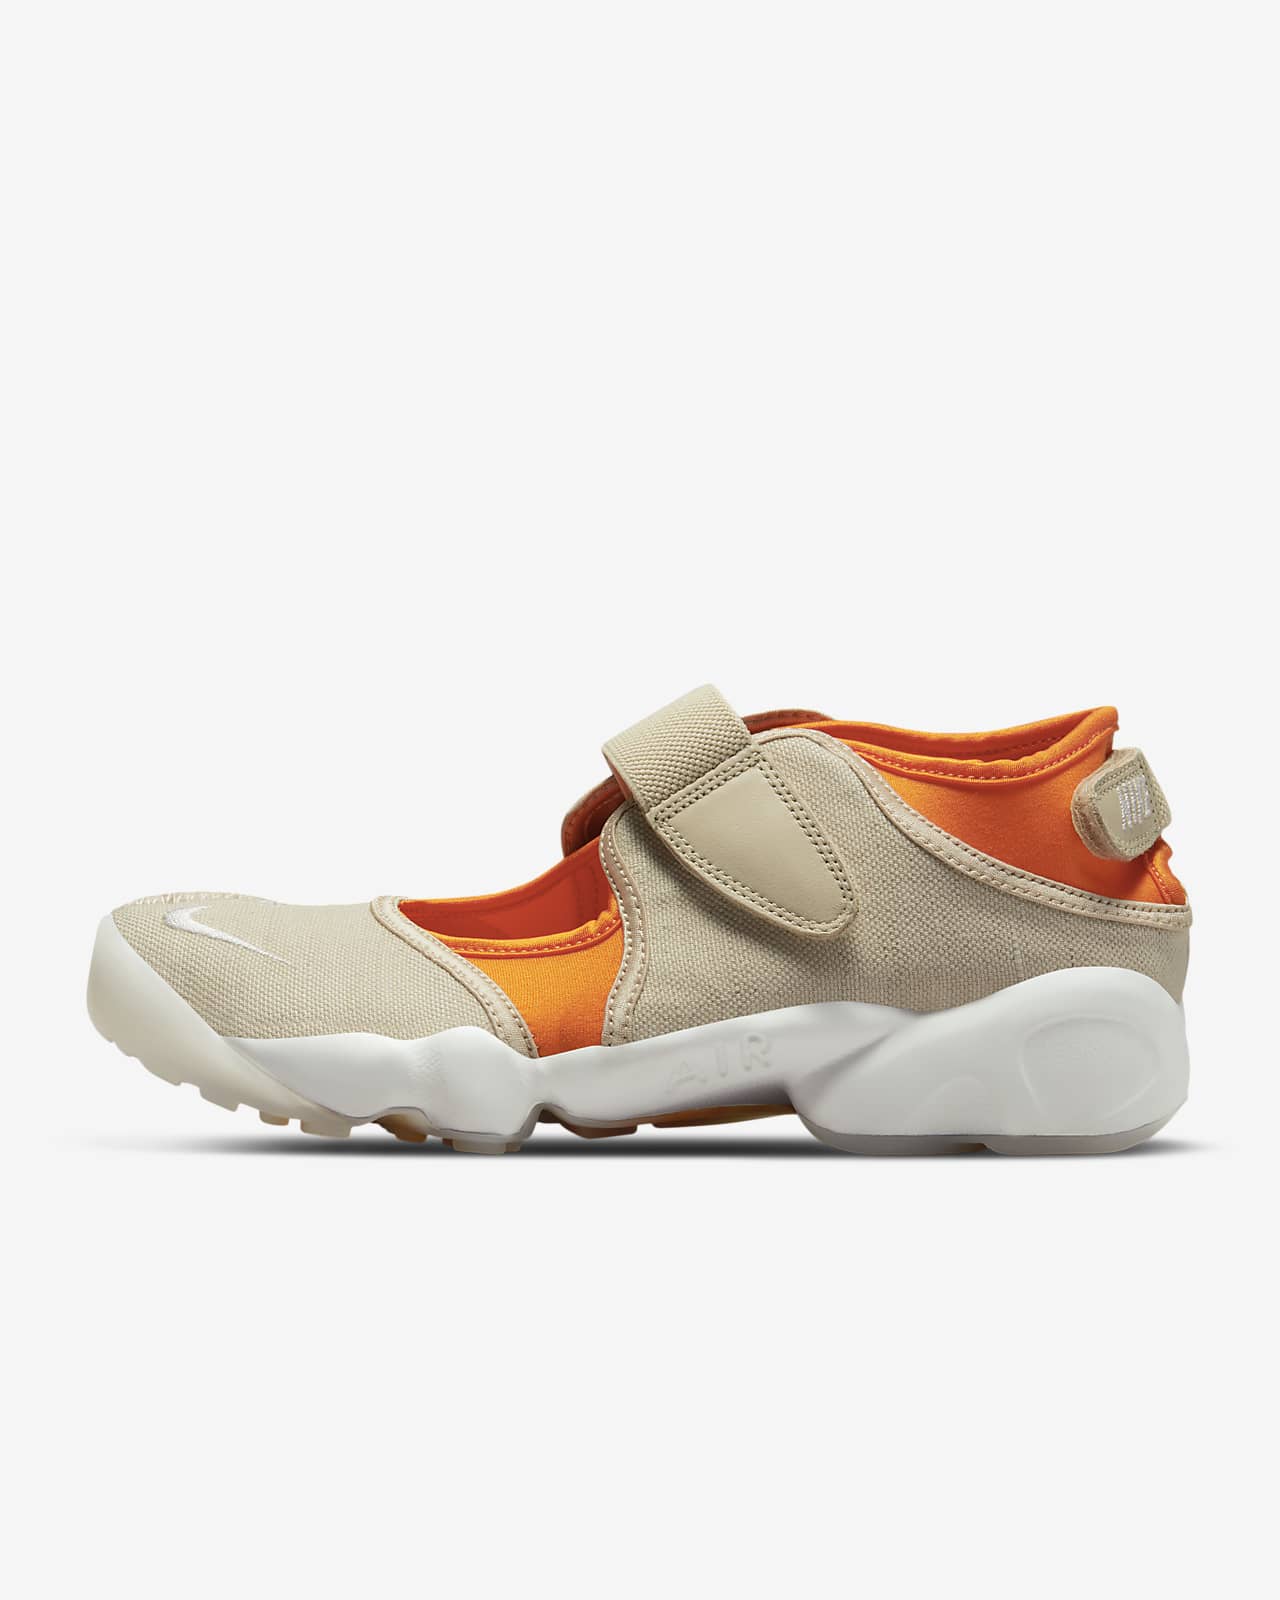 womens nike air rift trainers size 7